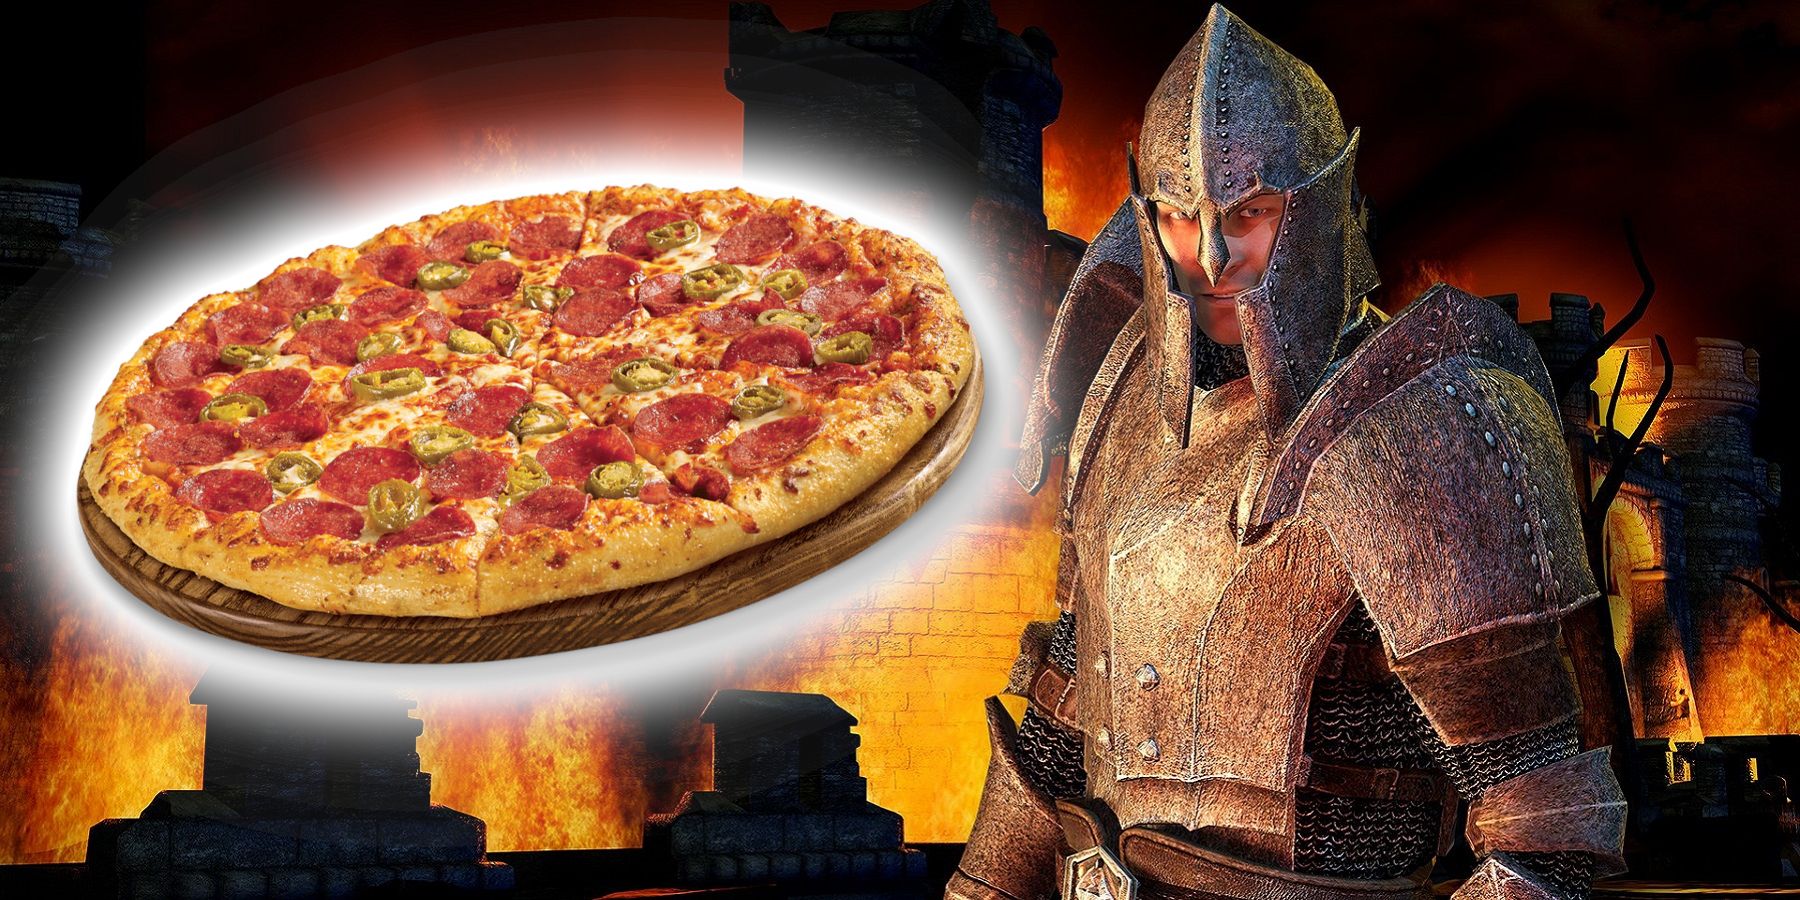 Image from Elder Scrolls 4: Oblivion showing an Imperial soldier stood next to a floating pizza.